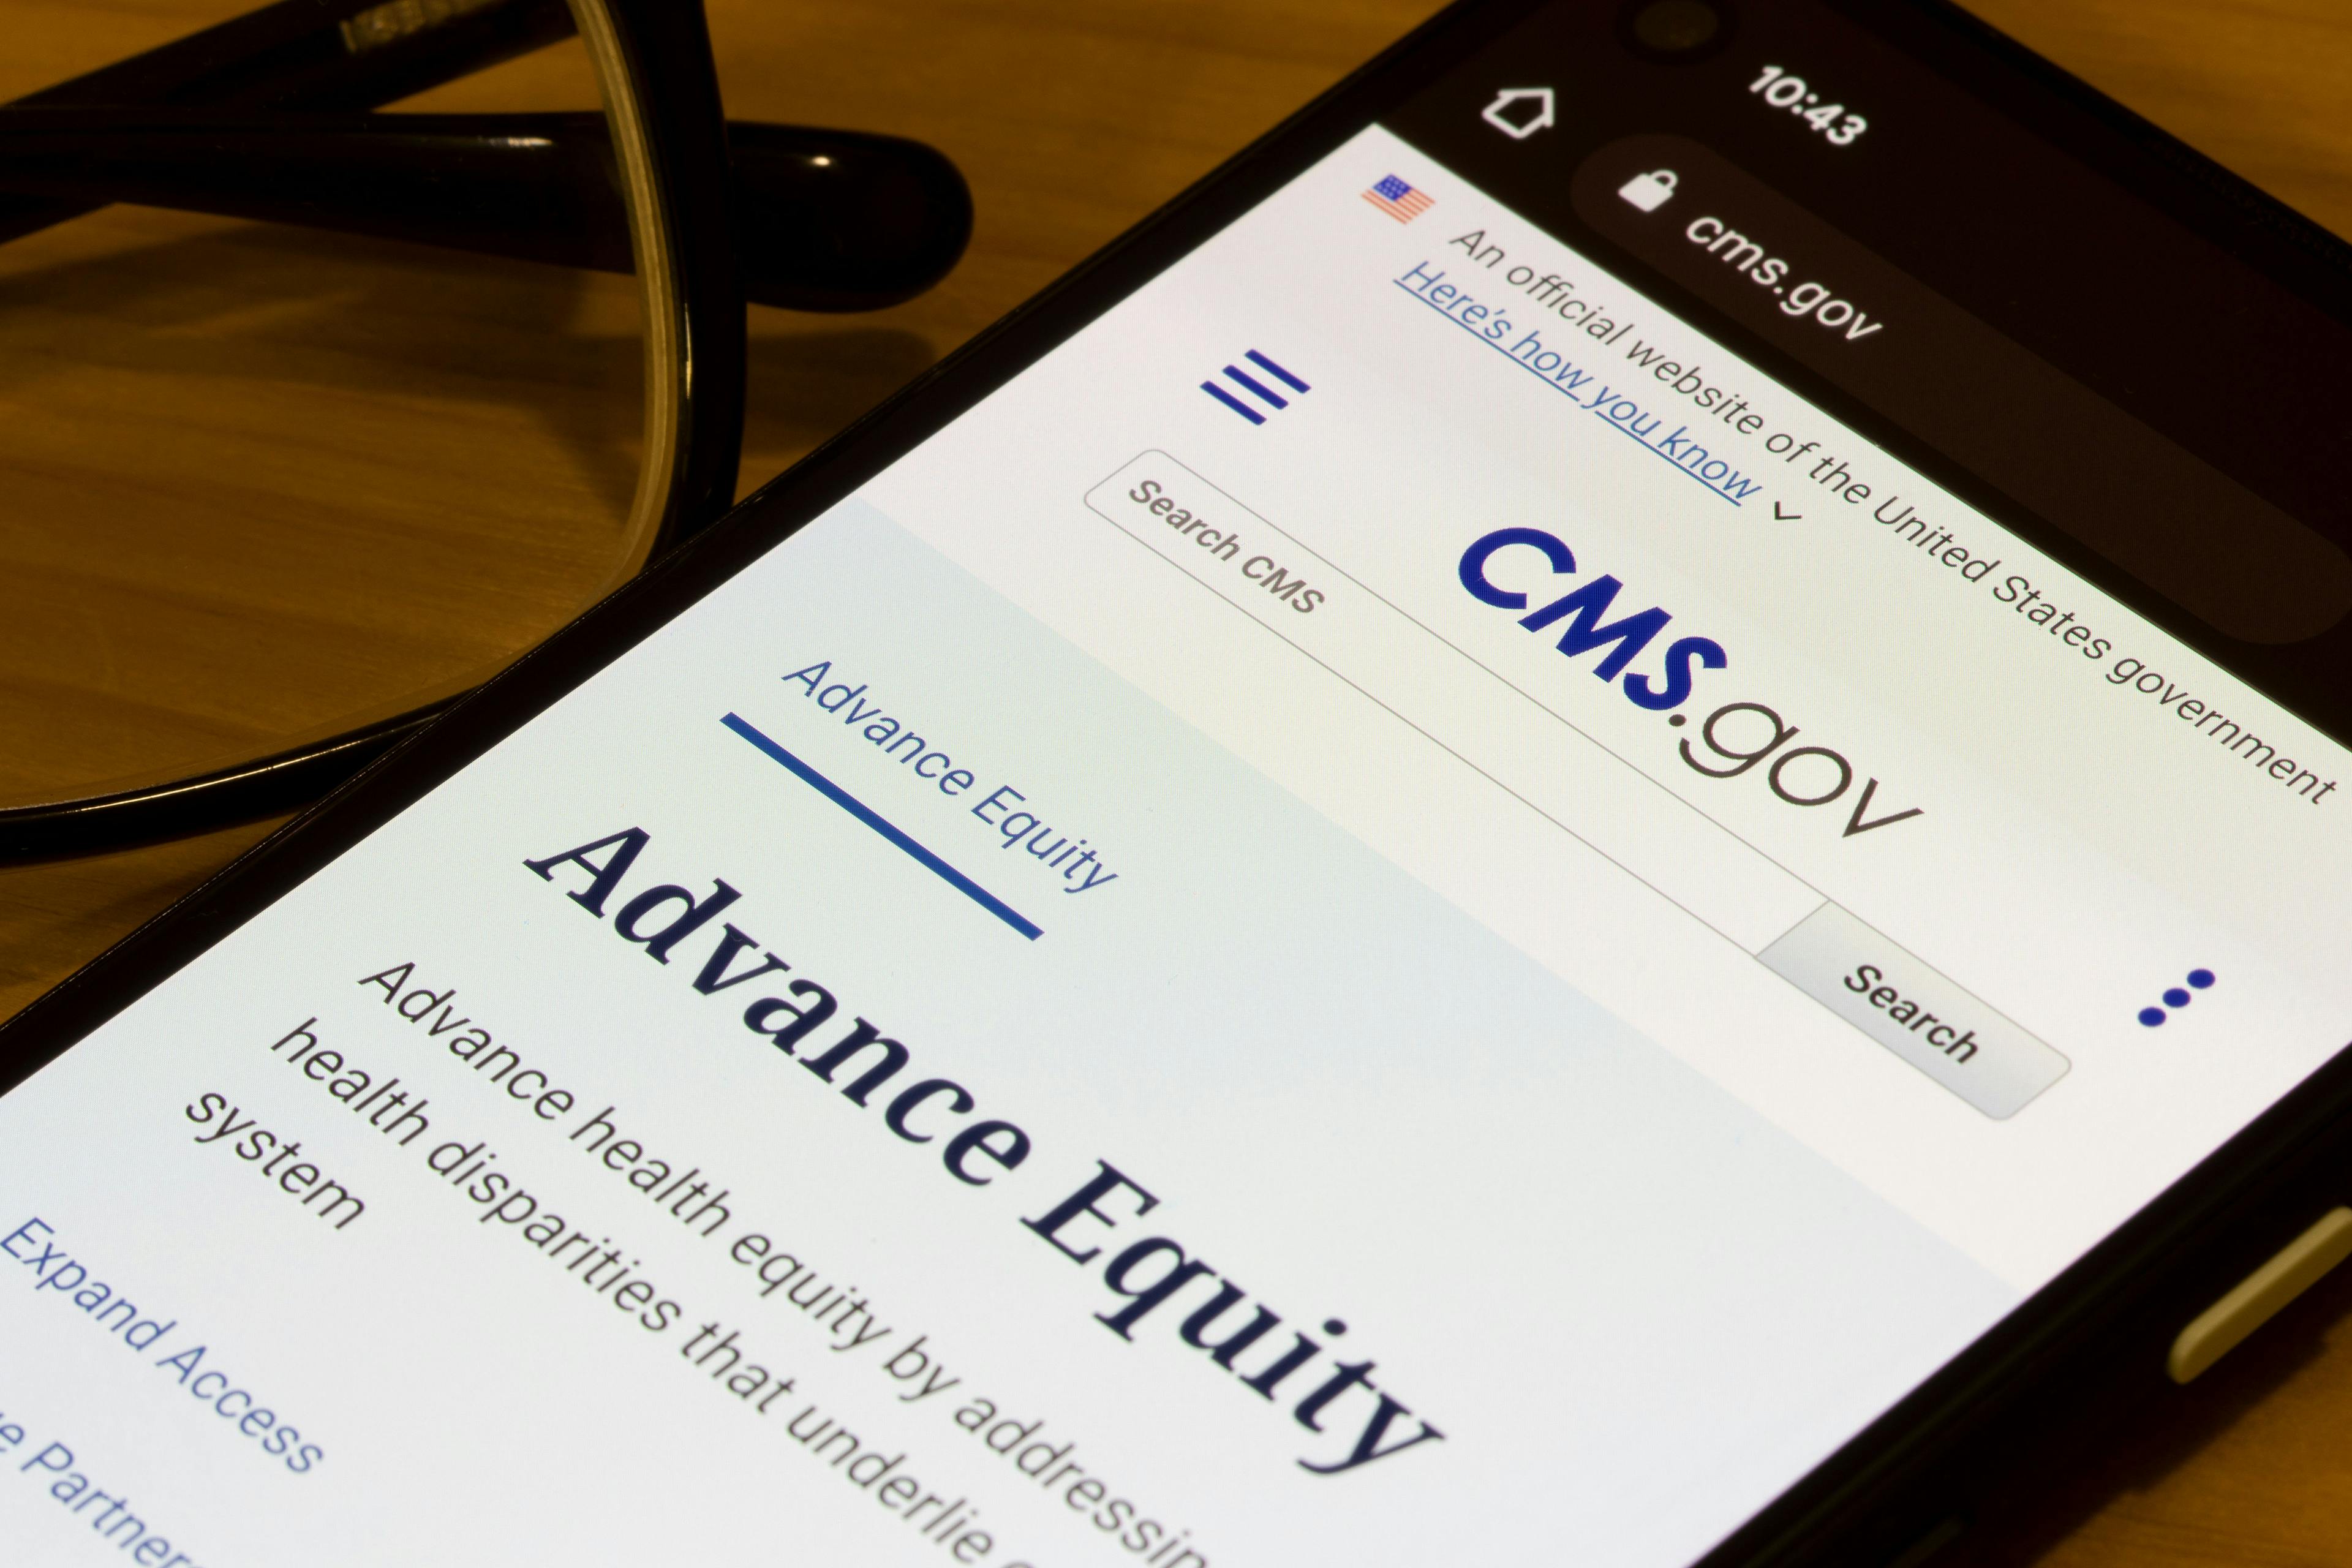 The homepage of CMS.gov is seen on a smartphone | Tada Images - stock.adobe.com